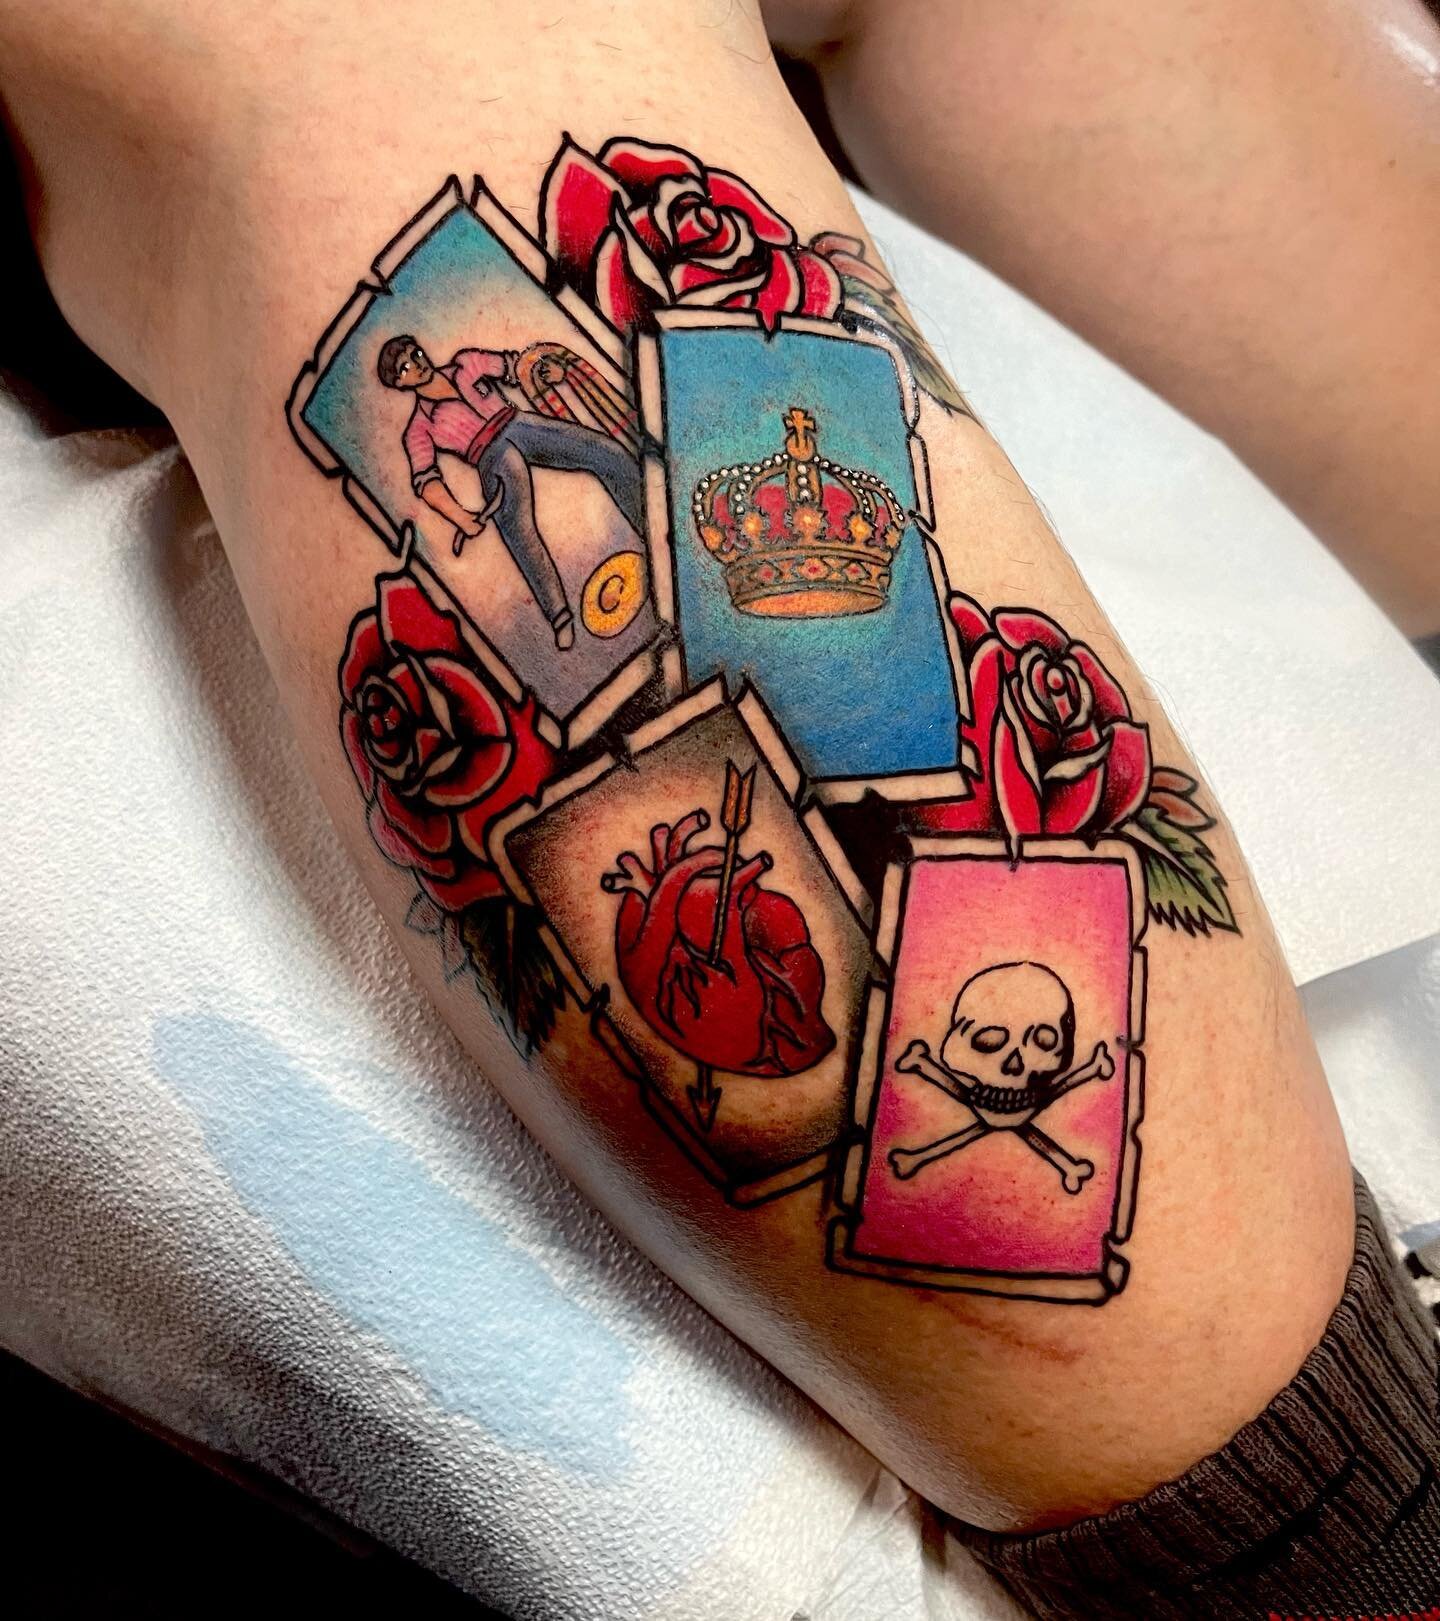 Loter&iacute;a 💀 ❤️ 🗡 👑 
More please 💥
Link in bio for booking✨